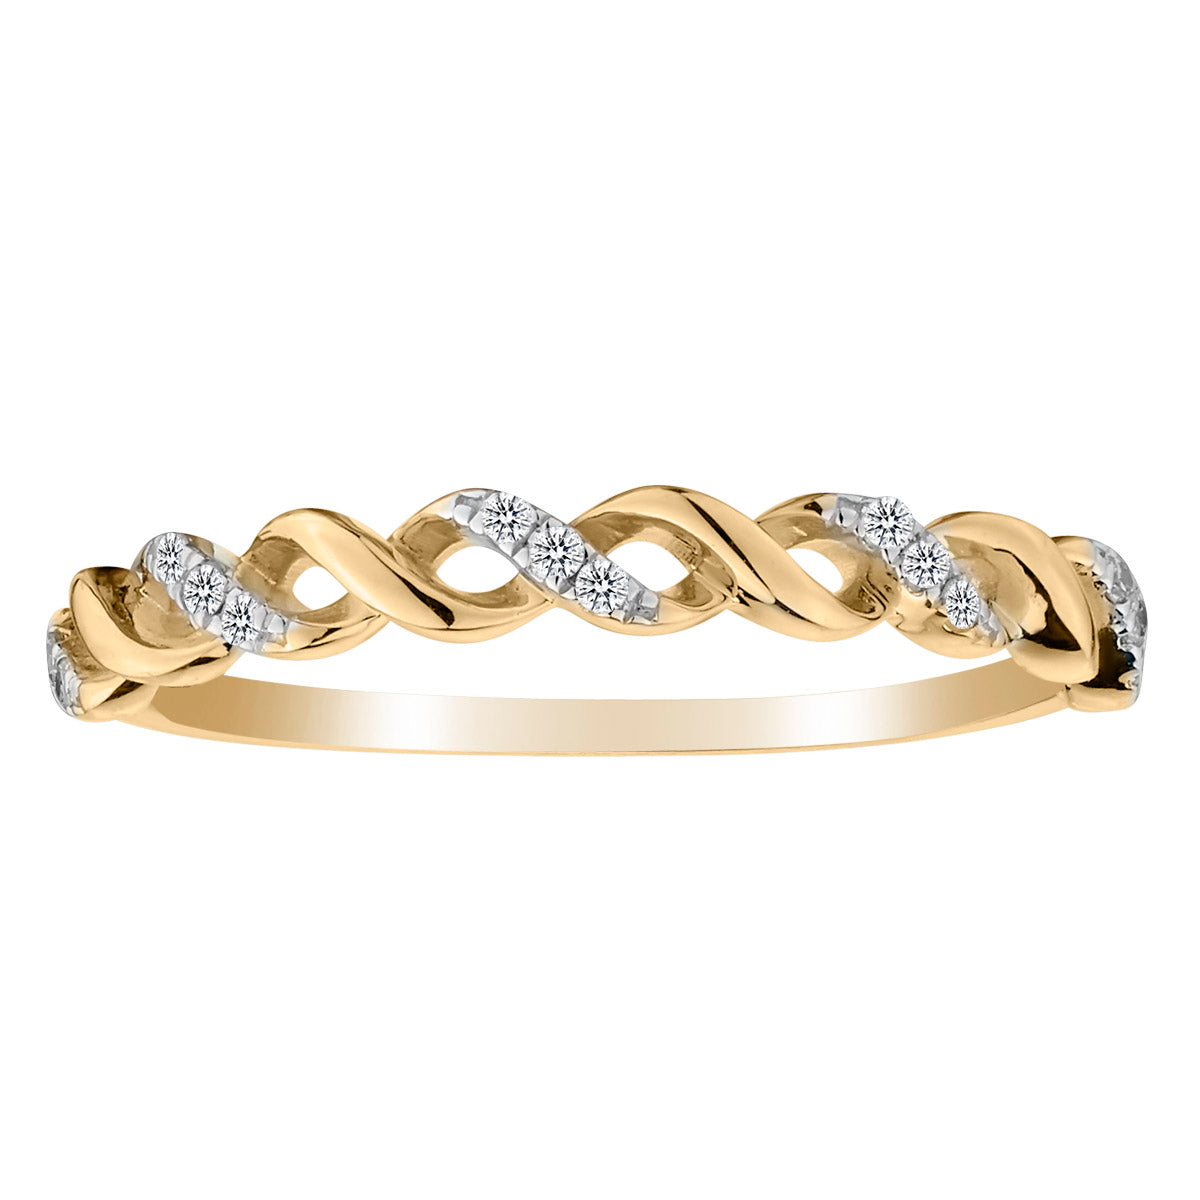 .08 Carat of Diamonds "Infinity" Ring, 10kt Yellow Gold......................NOW